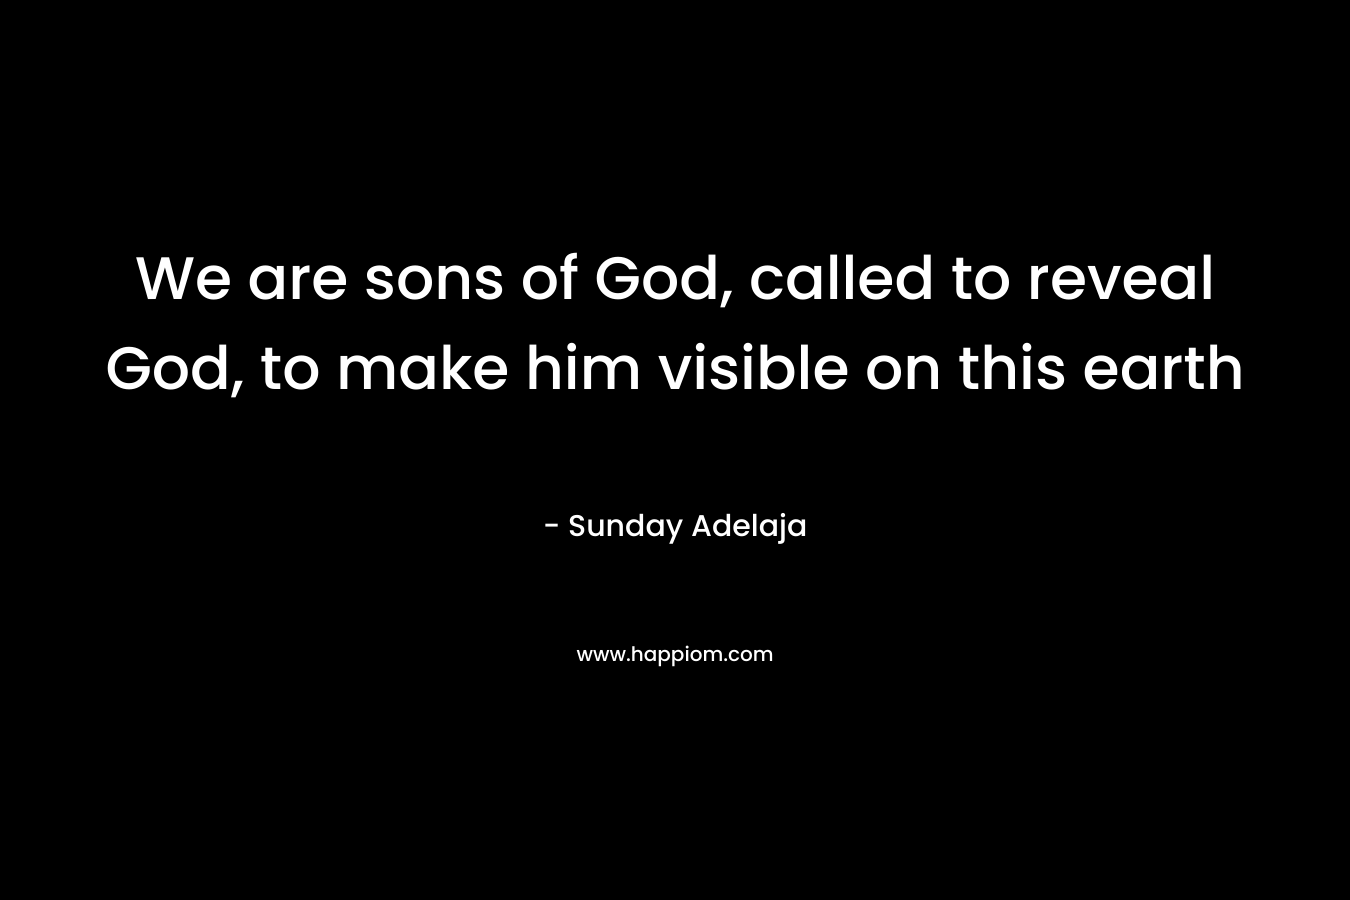 We are sons of God, called to reveal God, to make him visible on this earth